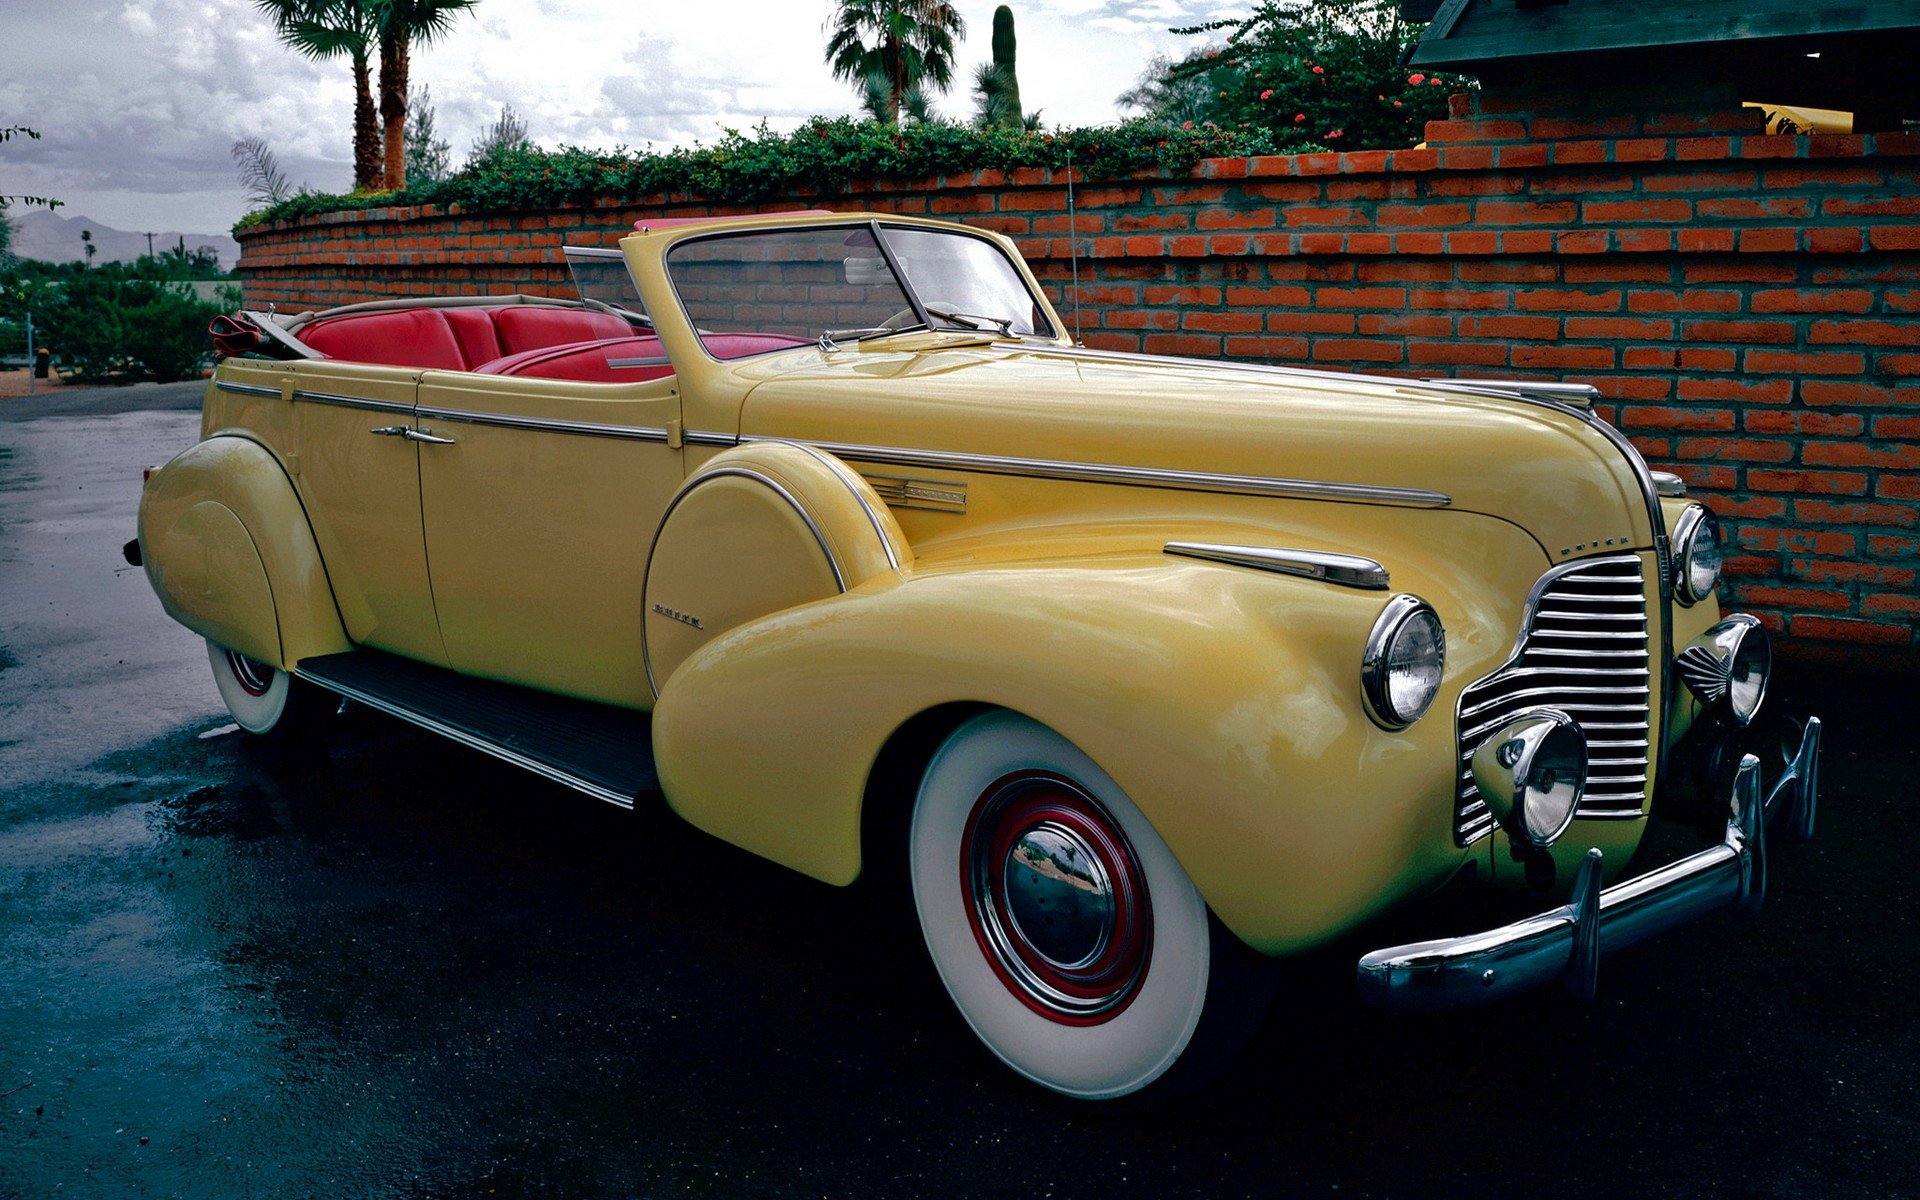 vintage, Old, Cars, Buick, Antique, Yellow, Cars Wallpaper